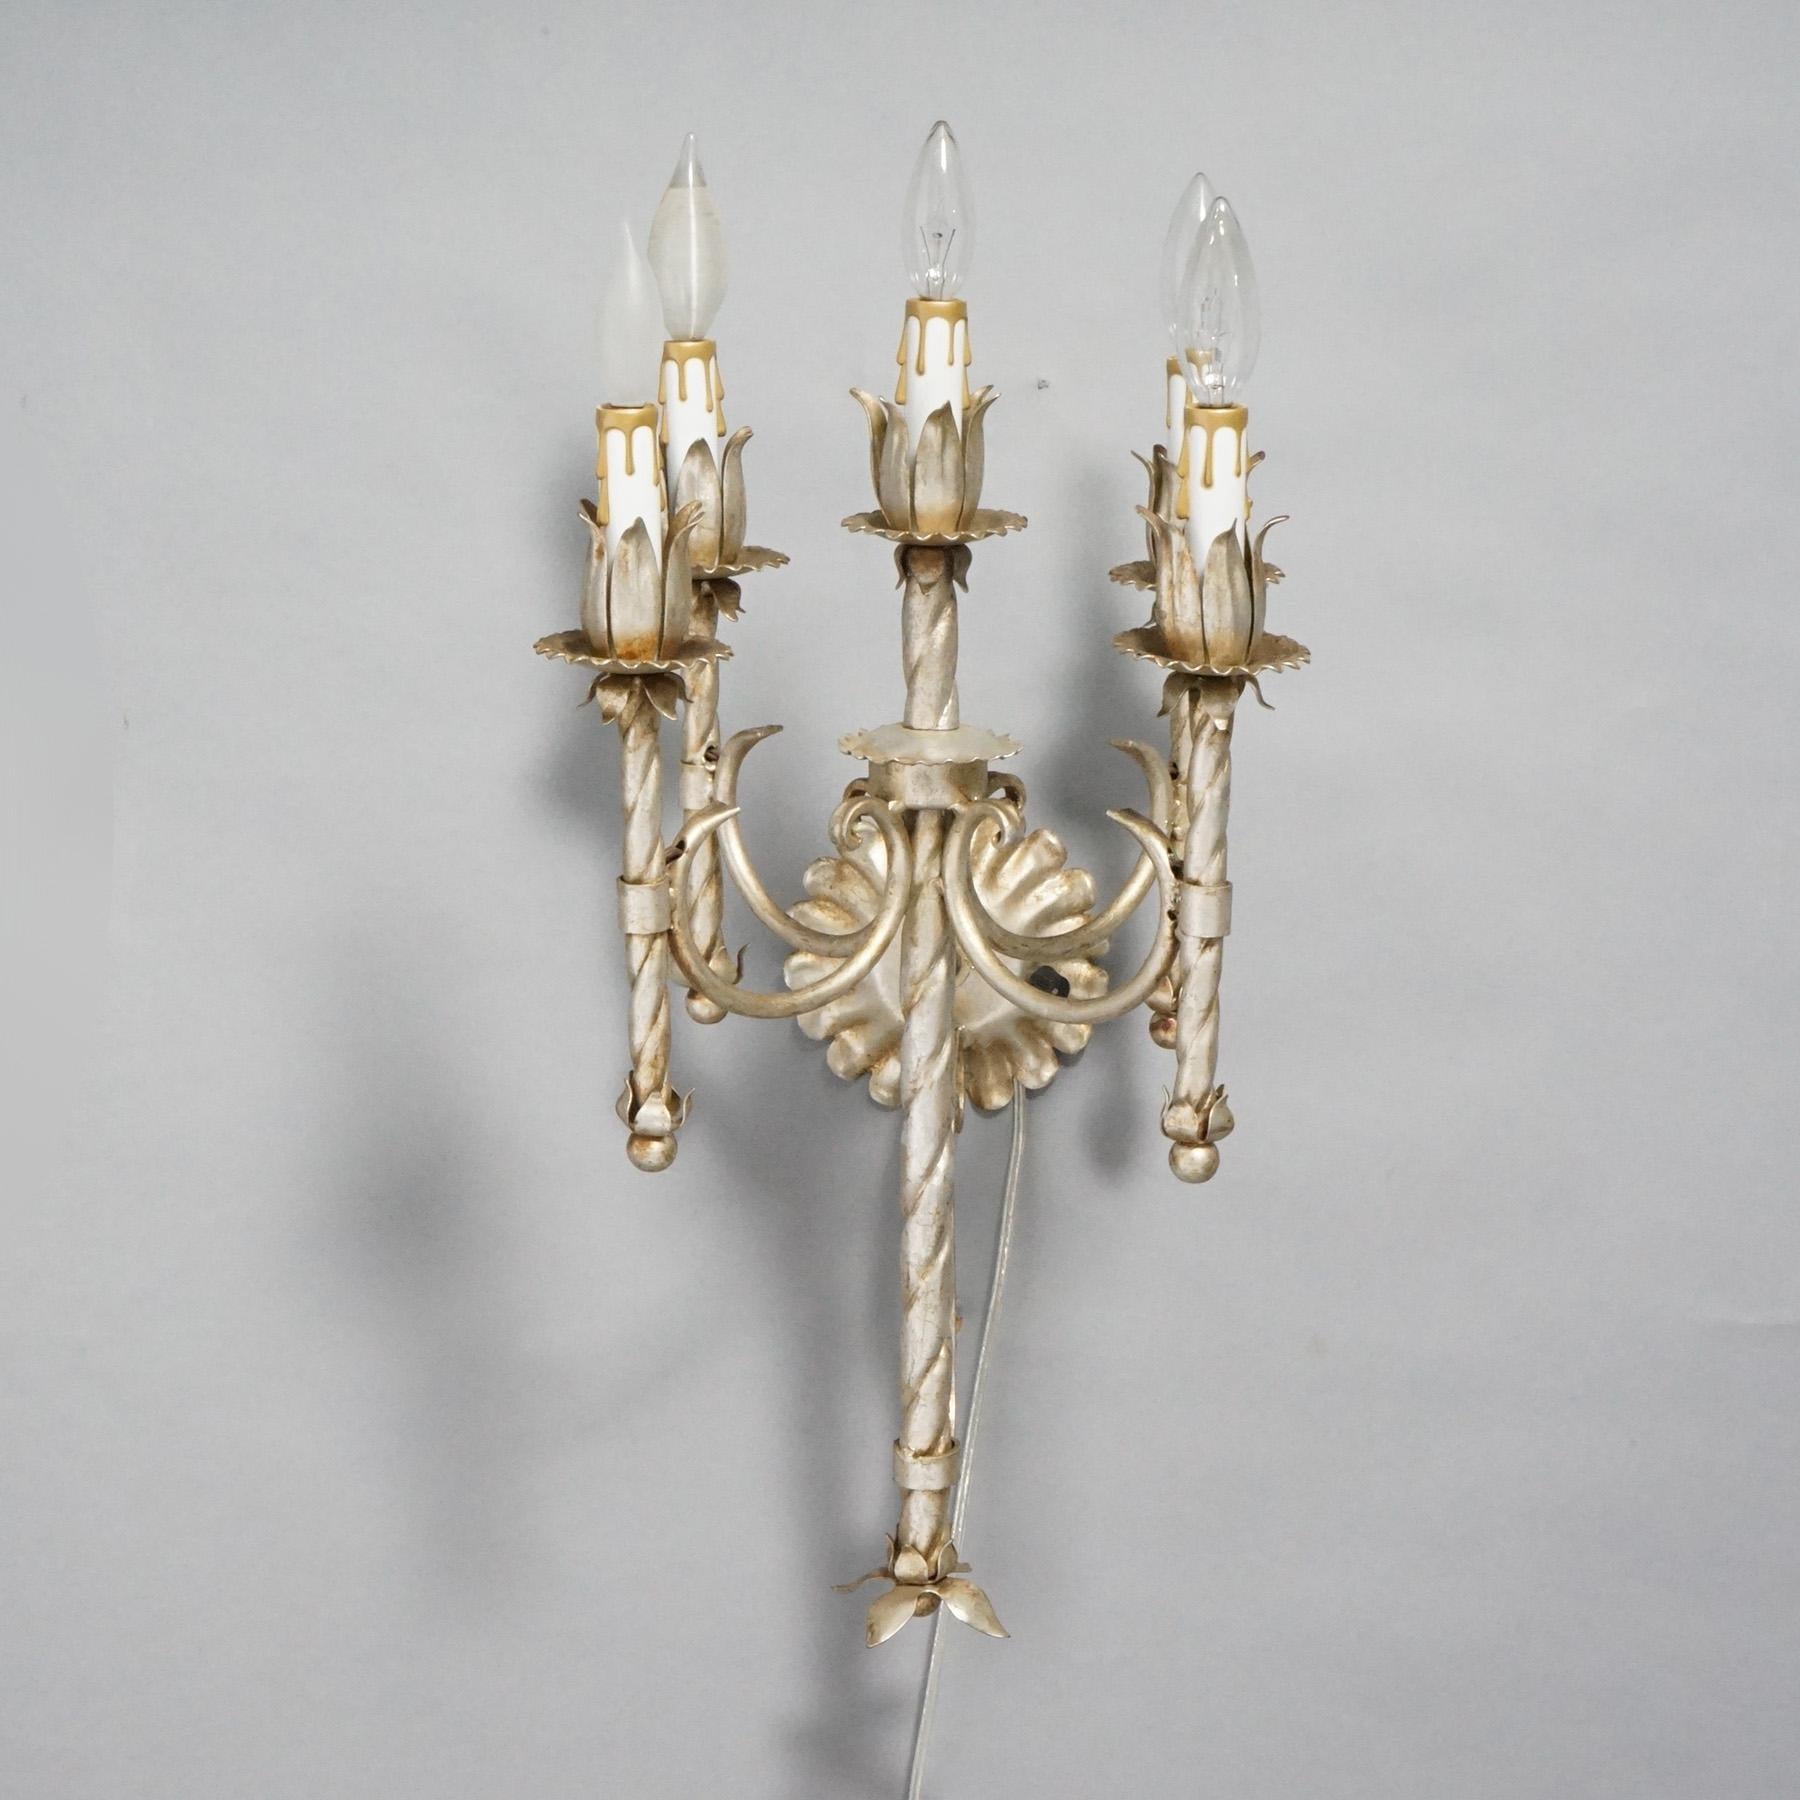 Metal Antique Arts & Crafts Gothic Silvered Finish Candelabra Wall Sconces 20th C. For Sale